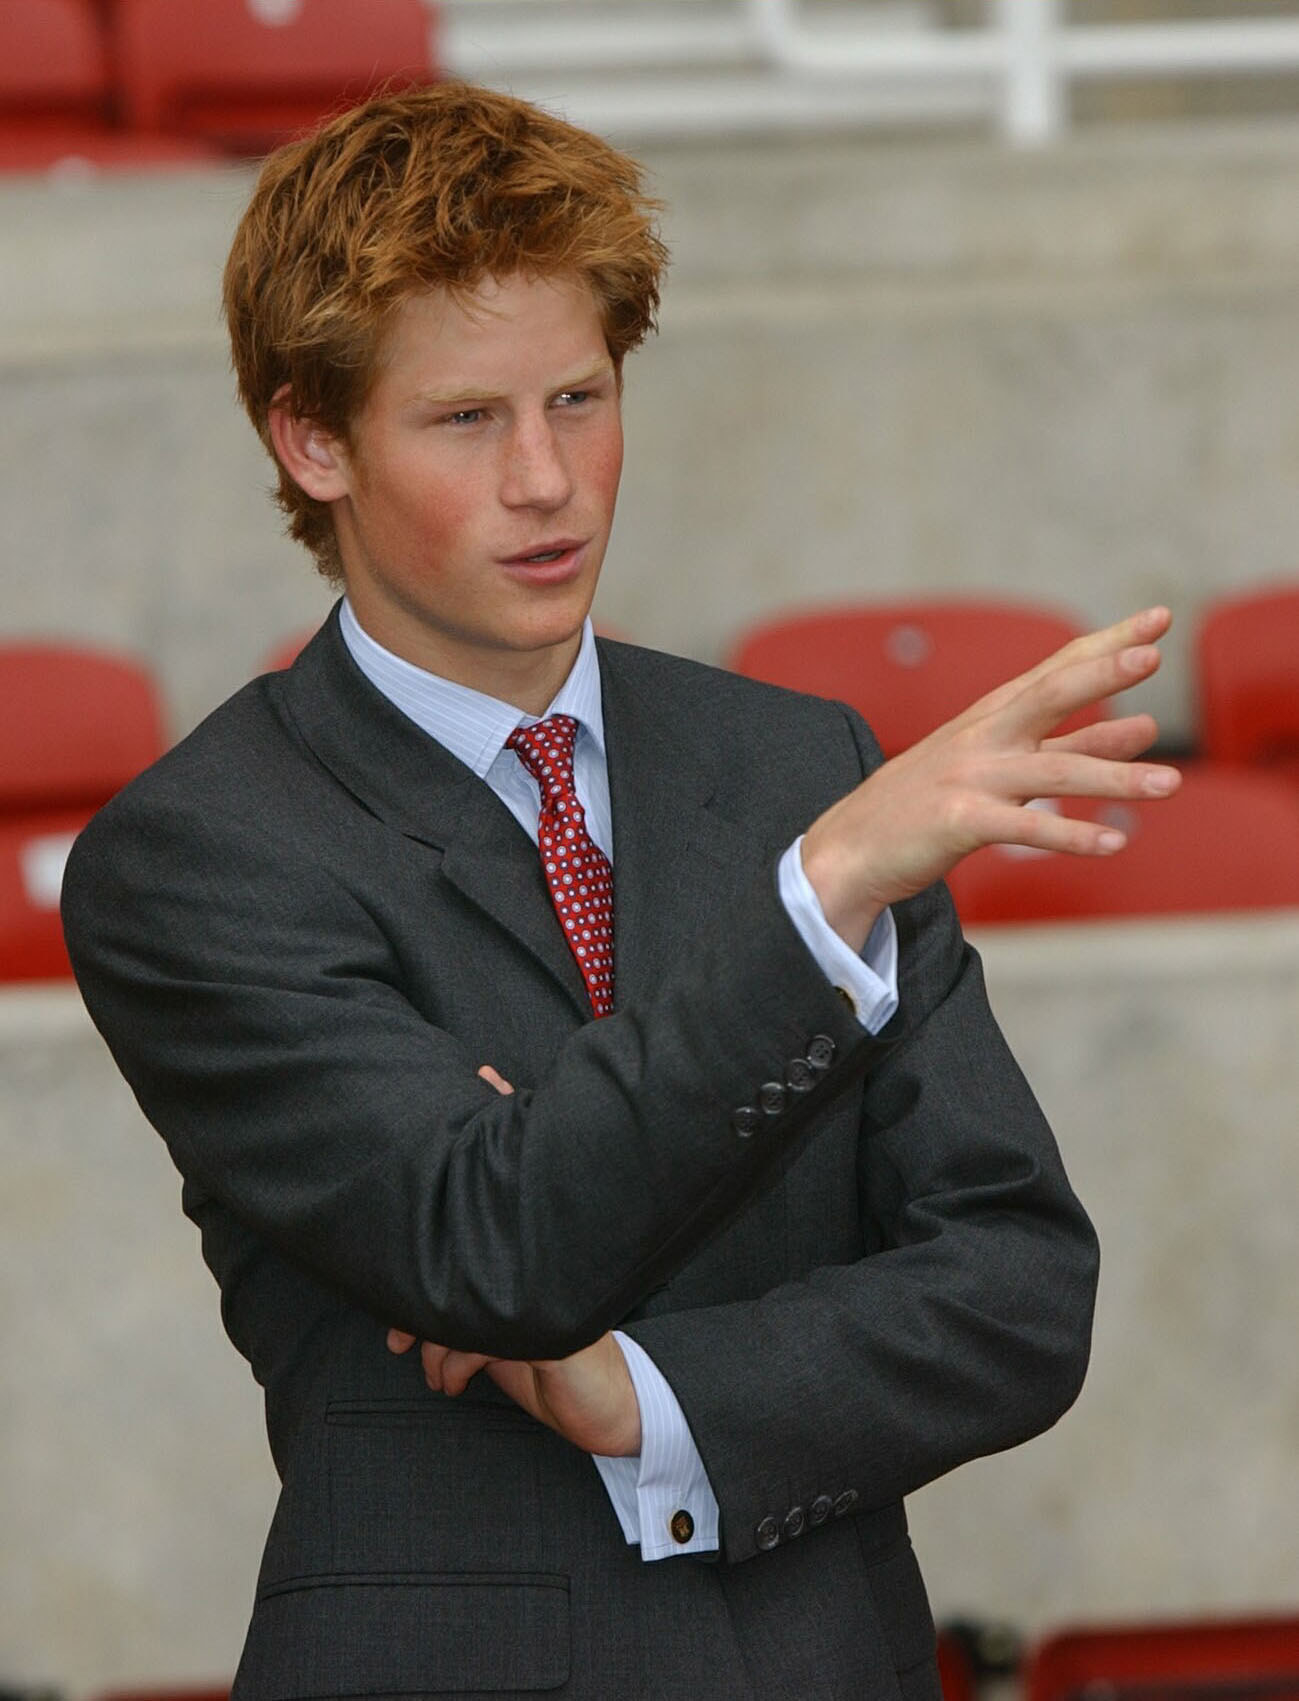 Prince Harry talking and gesturing